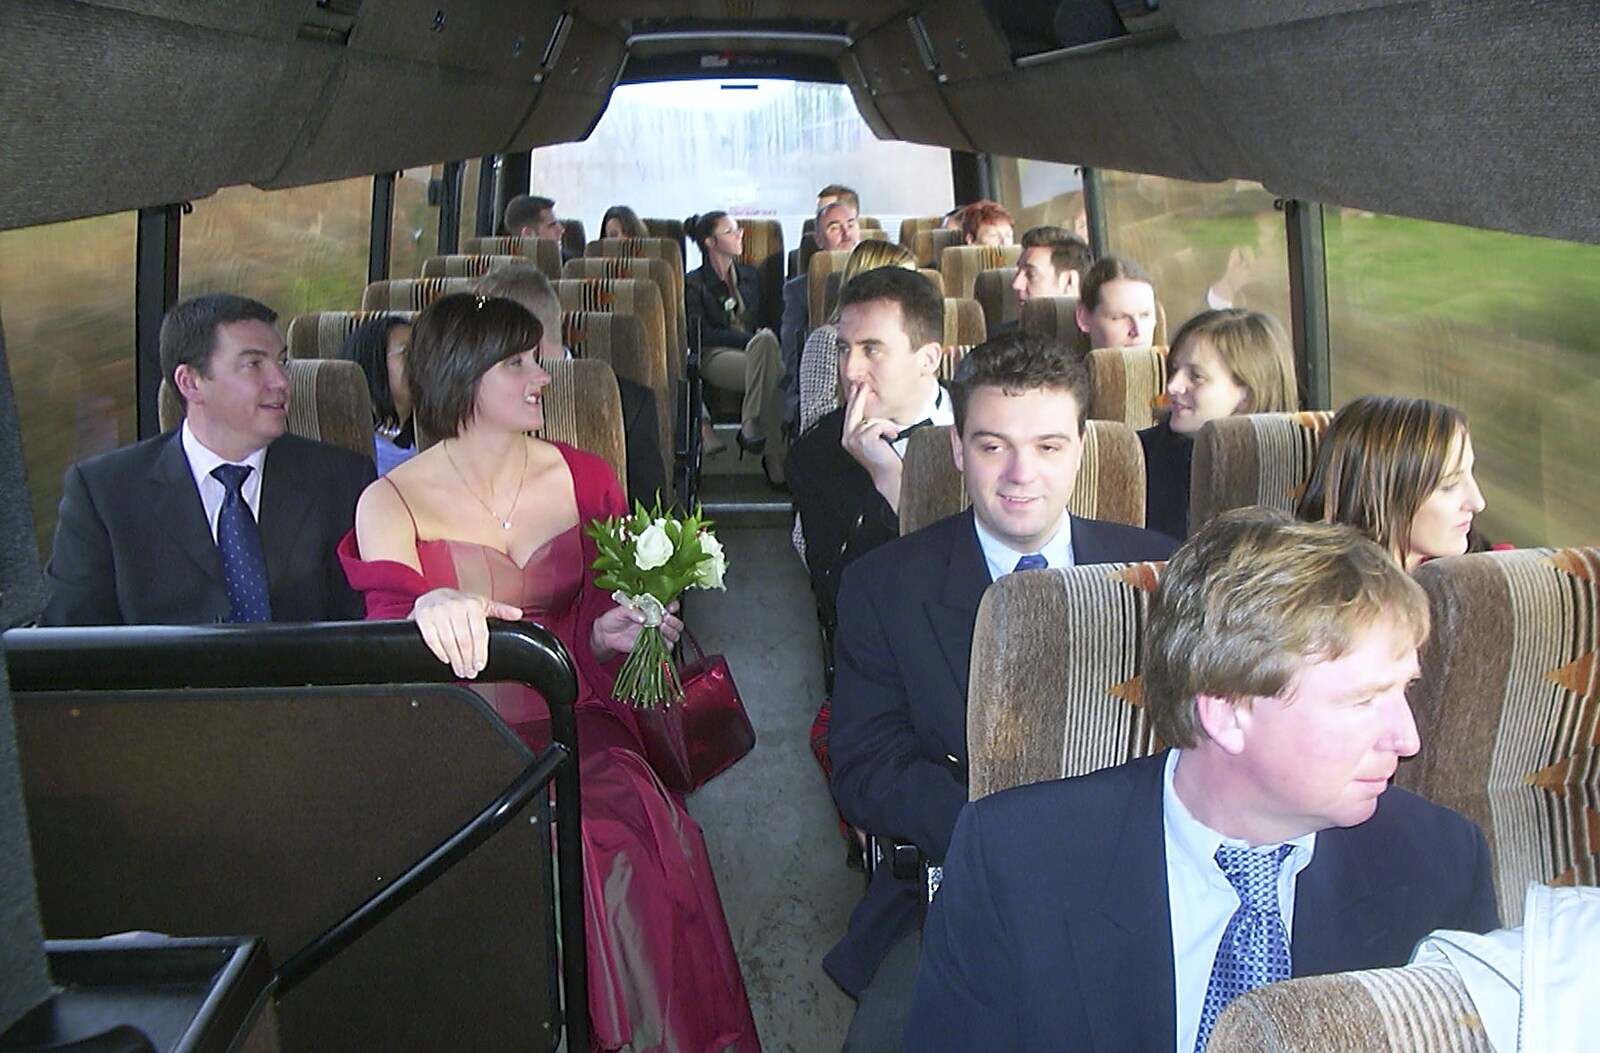 Guests on the bus from Sis's Nearly-Christmas Wedding, Meavy, Dartmoor - 20th December 2003